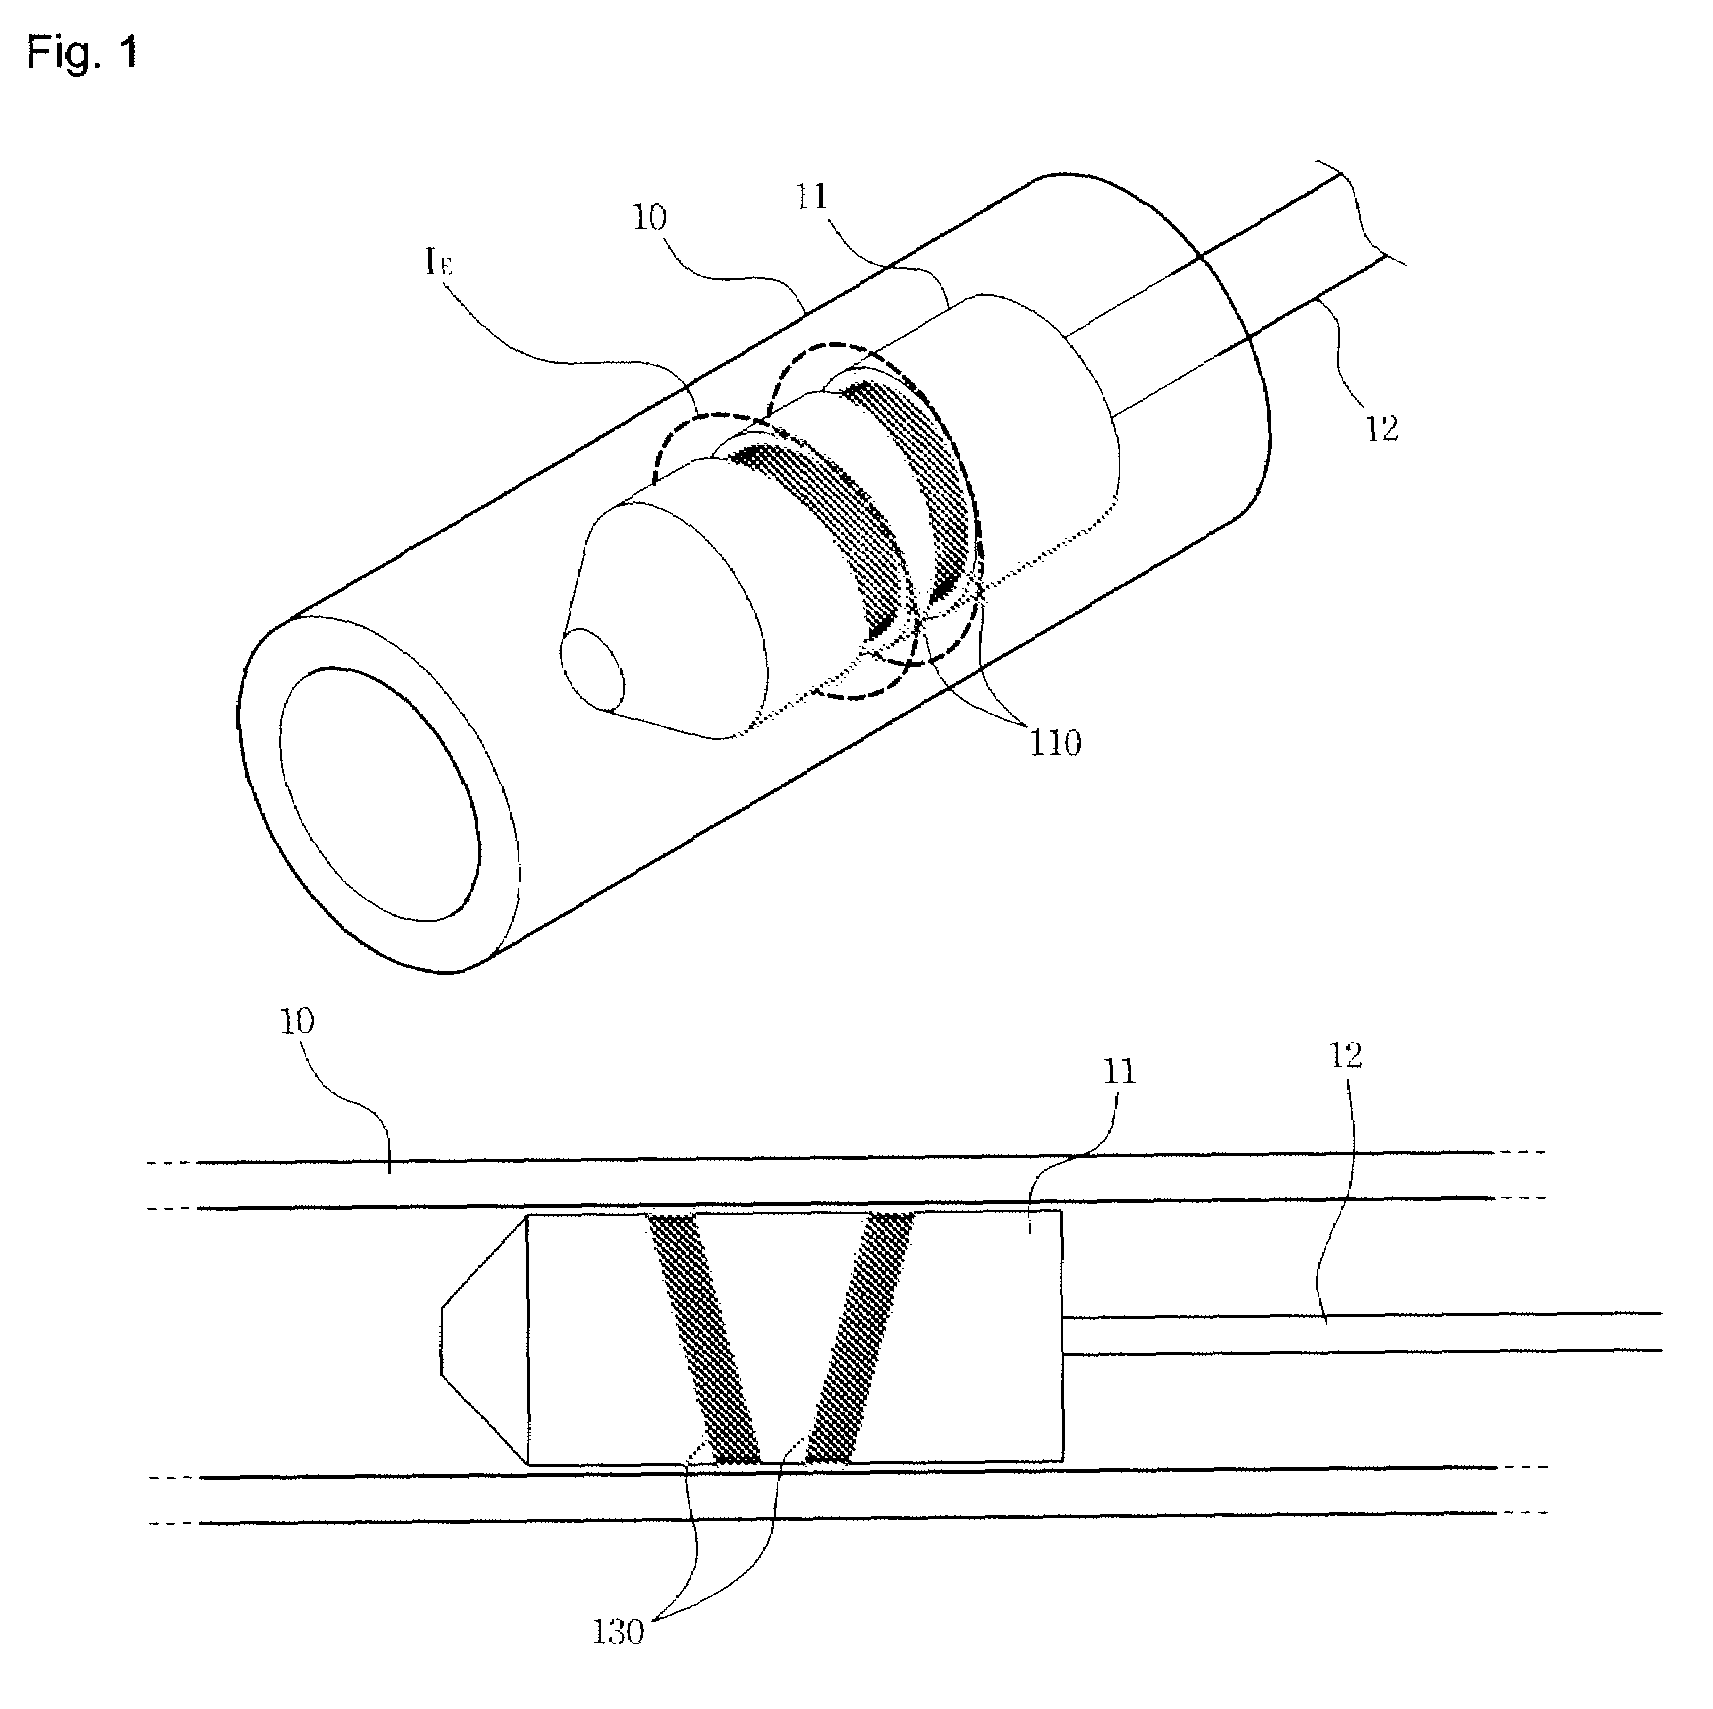 Sensor for detecting surface defects of metal tube using eddy current method